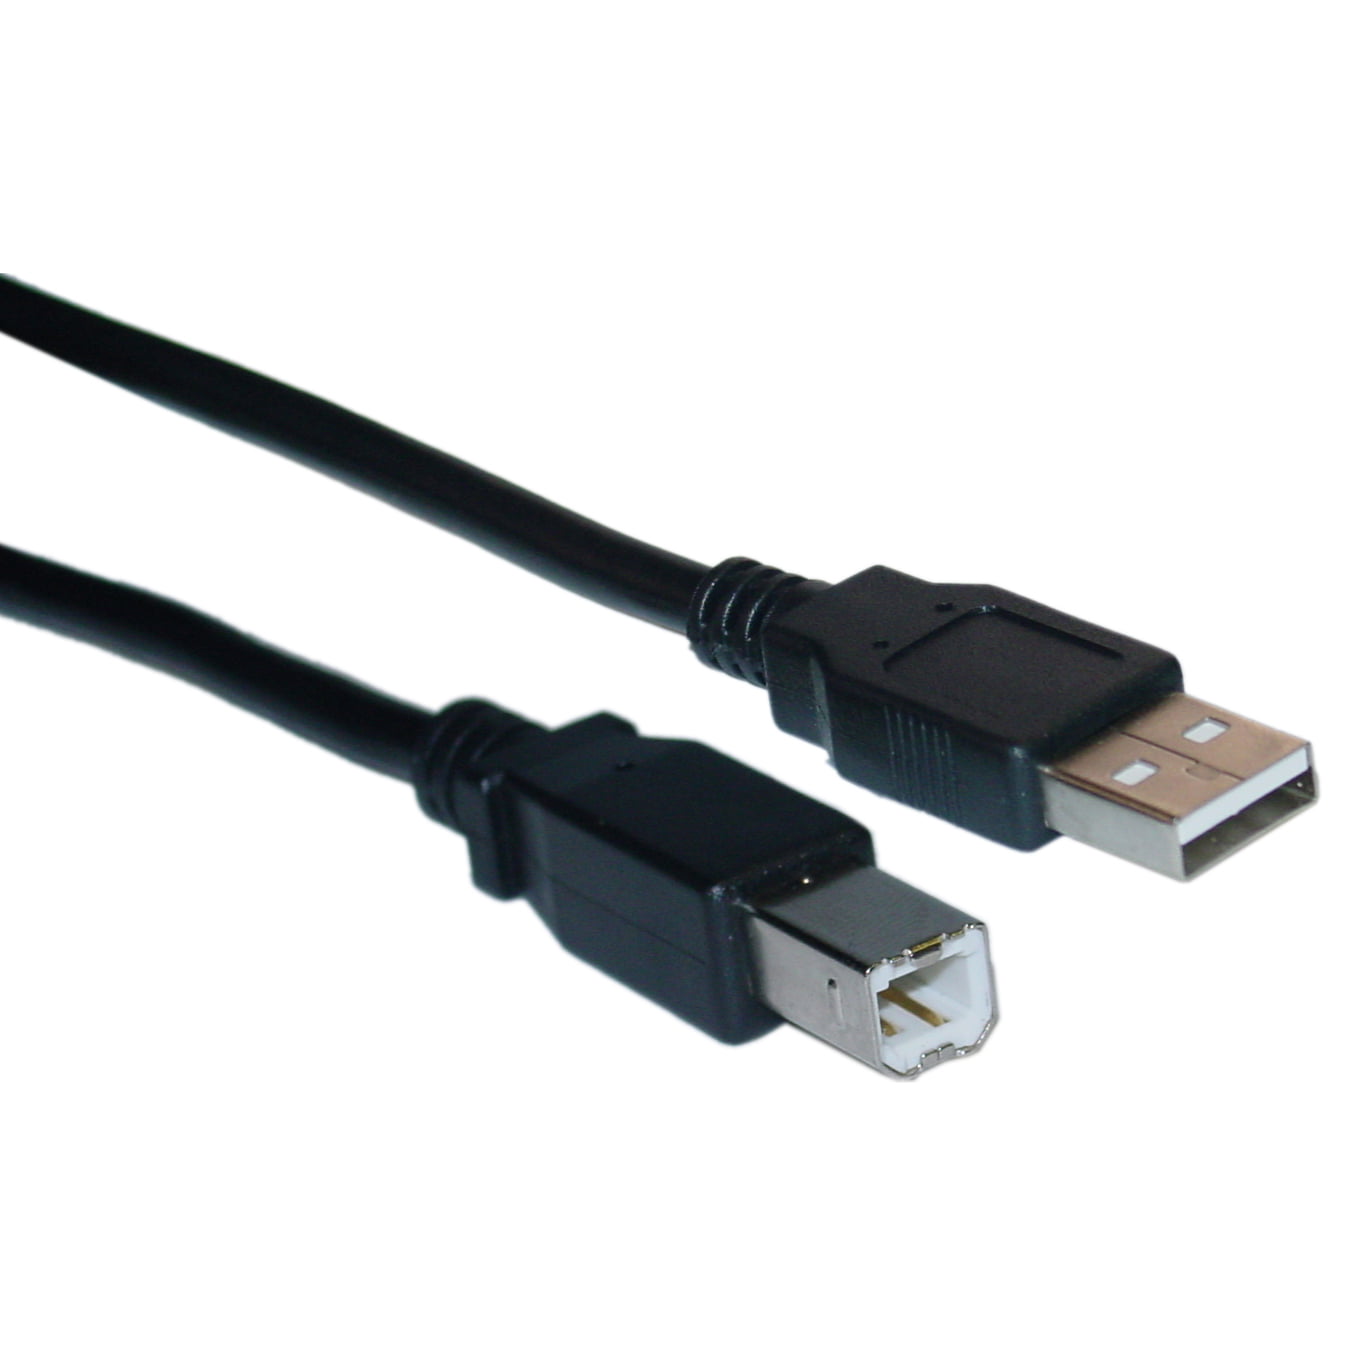 15ft USB 2.0 Extension & 10ft A Male/B Male Cable for E460DW Mono Laser Printer